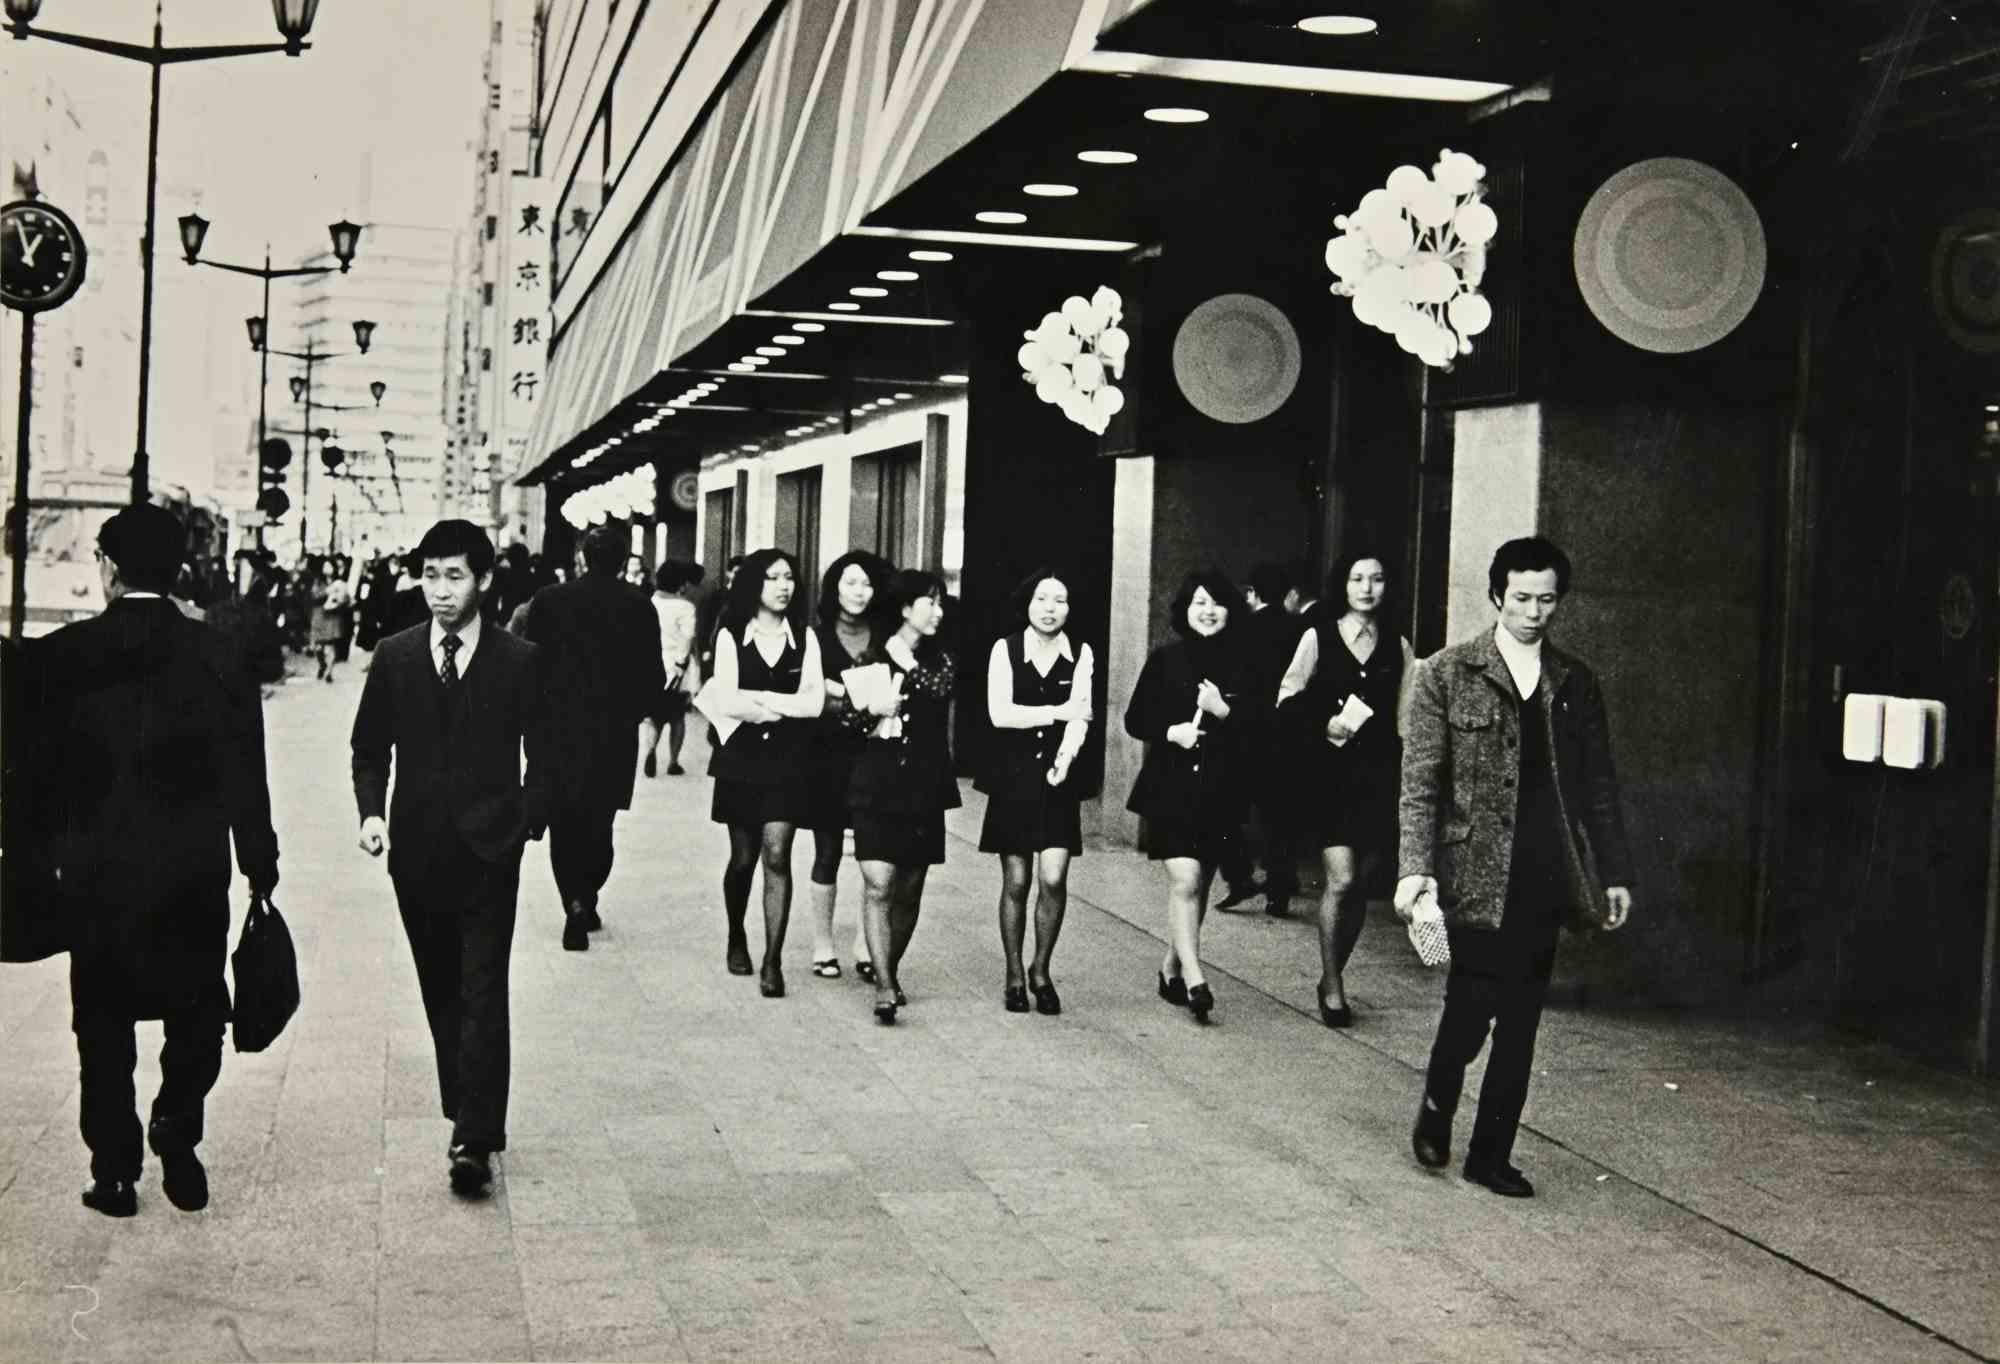 Unknown Figurative Photograph - Japan Cherry Blossoms and Discs – Exit from Work - Vintage Photograph - 1960s